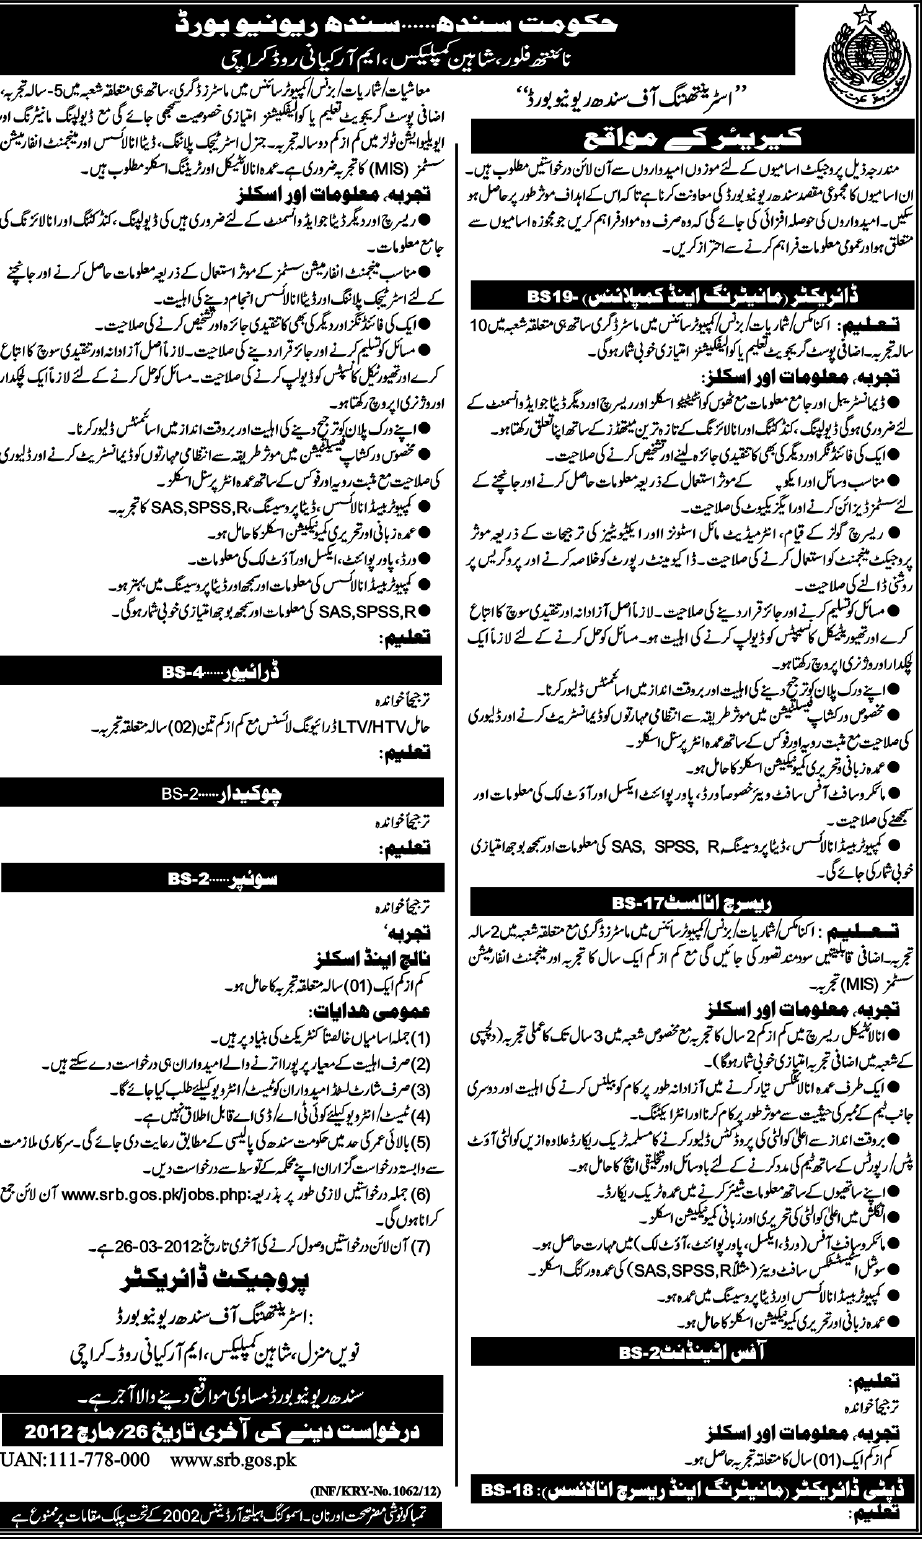 Sindh Revenue Board, Government of Sindh Jobs